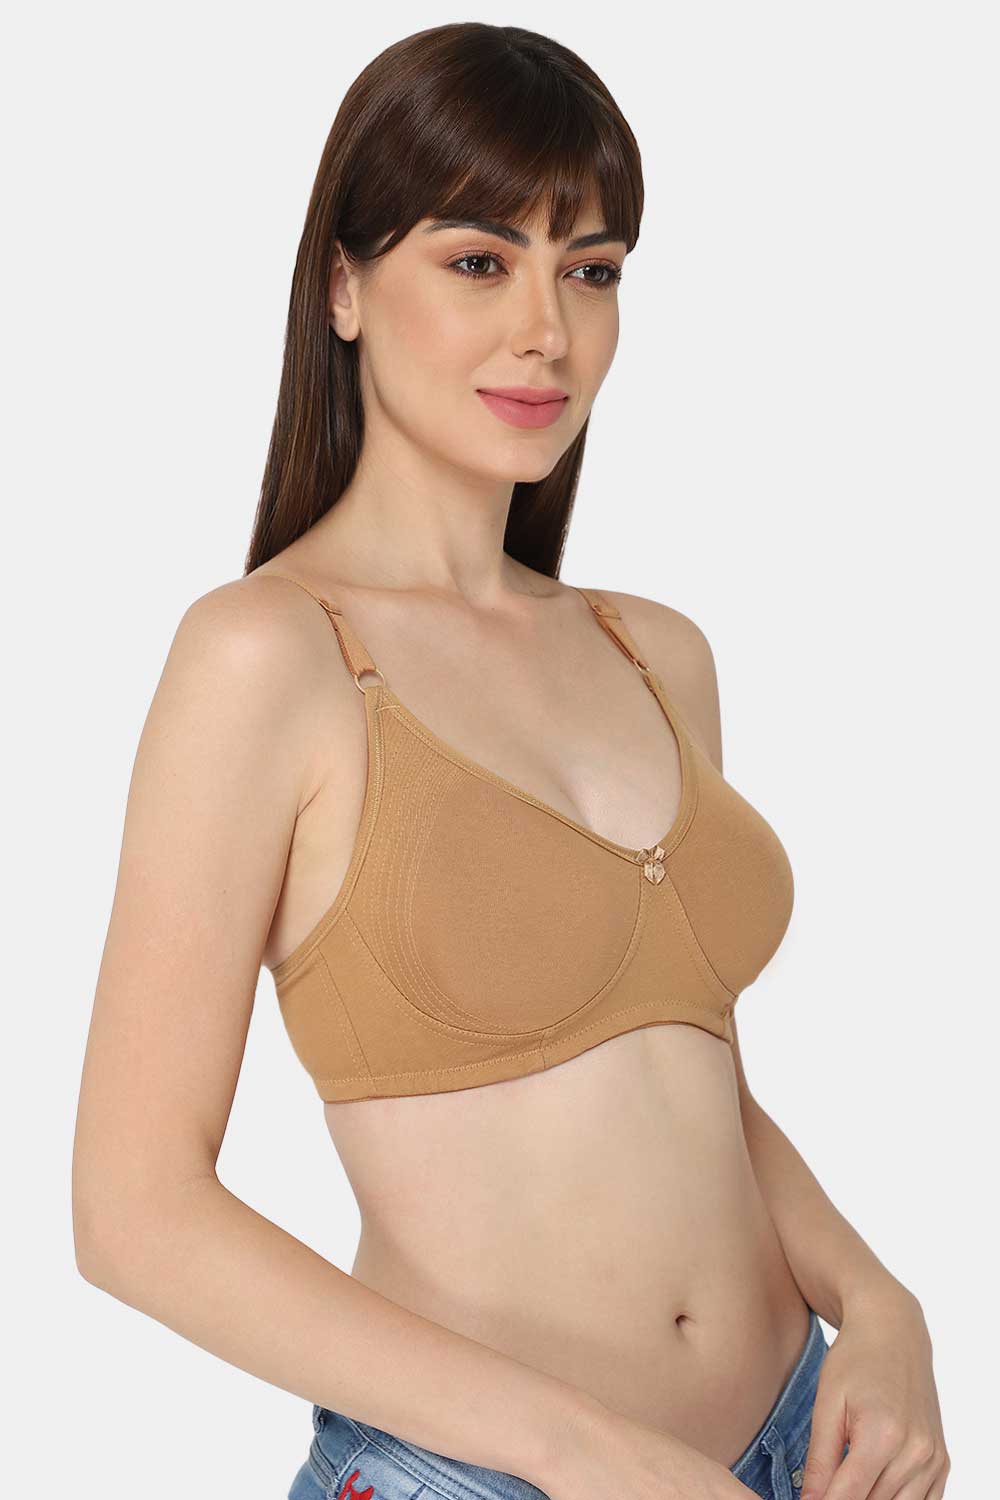 Buy Naidu Hall Intimacy Lingerie Women's Polyester Non-Padded, Non-Wired, Full  Coverage, Molded, with Hidden Side Shaper Regular Bra, 1 Piece